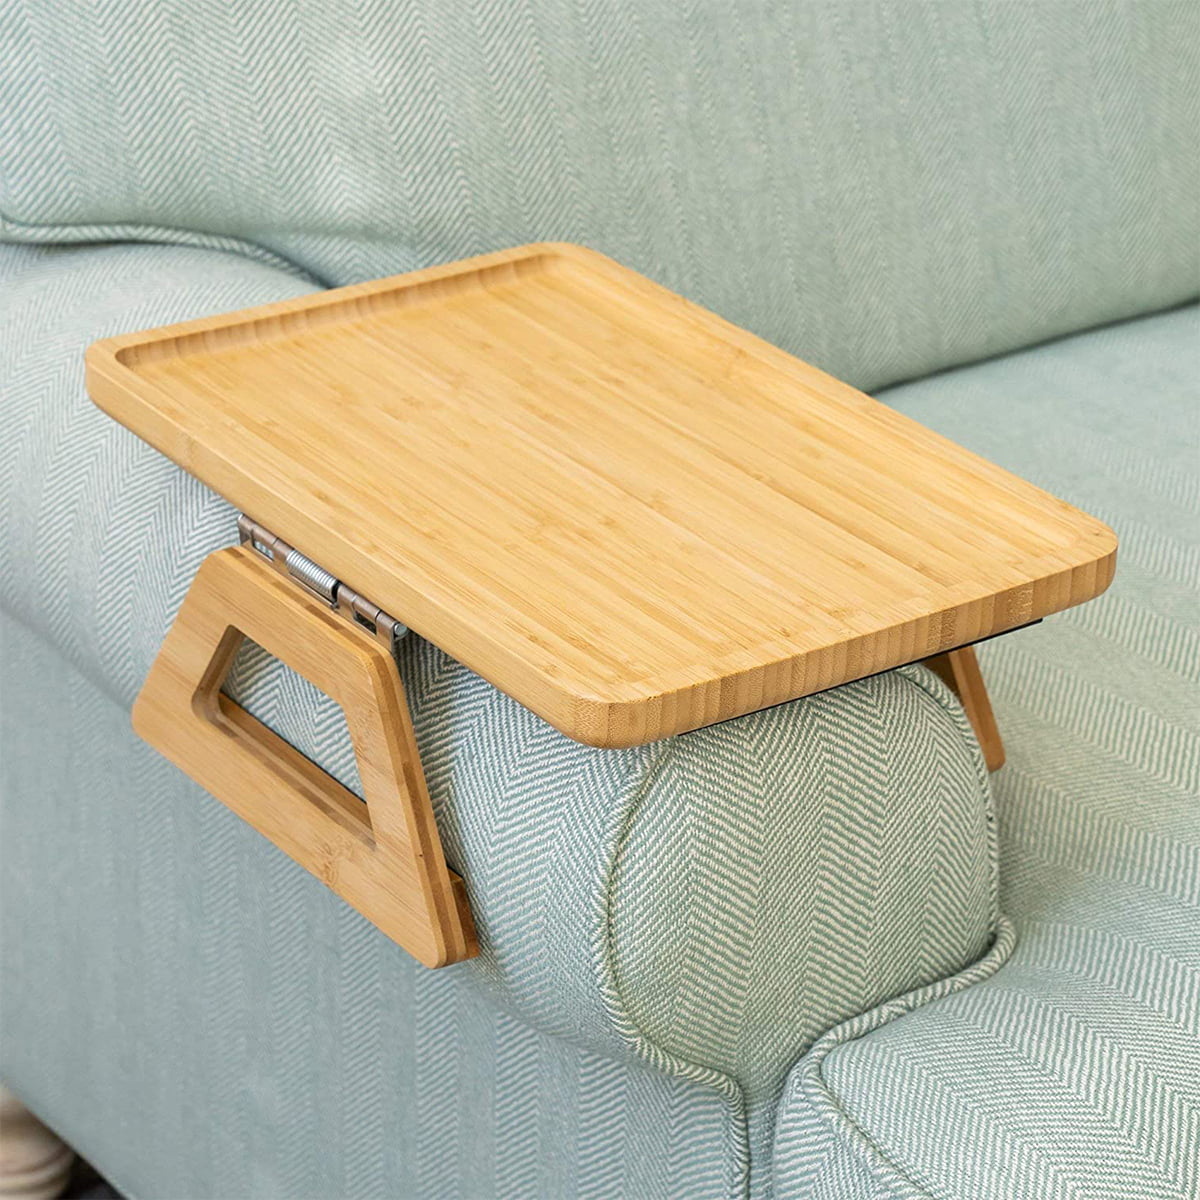 Sofa Arm Tray Table Portable Arm Clip-On Tray Space Saving Wooden Arm Rest Table for Wide Couches Stable Sofa Armrest Side Tables for Remote Drinks Snacks Phone Holder - Walmart.com